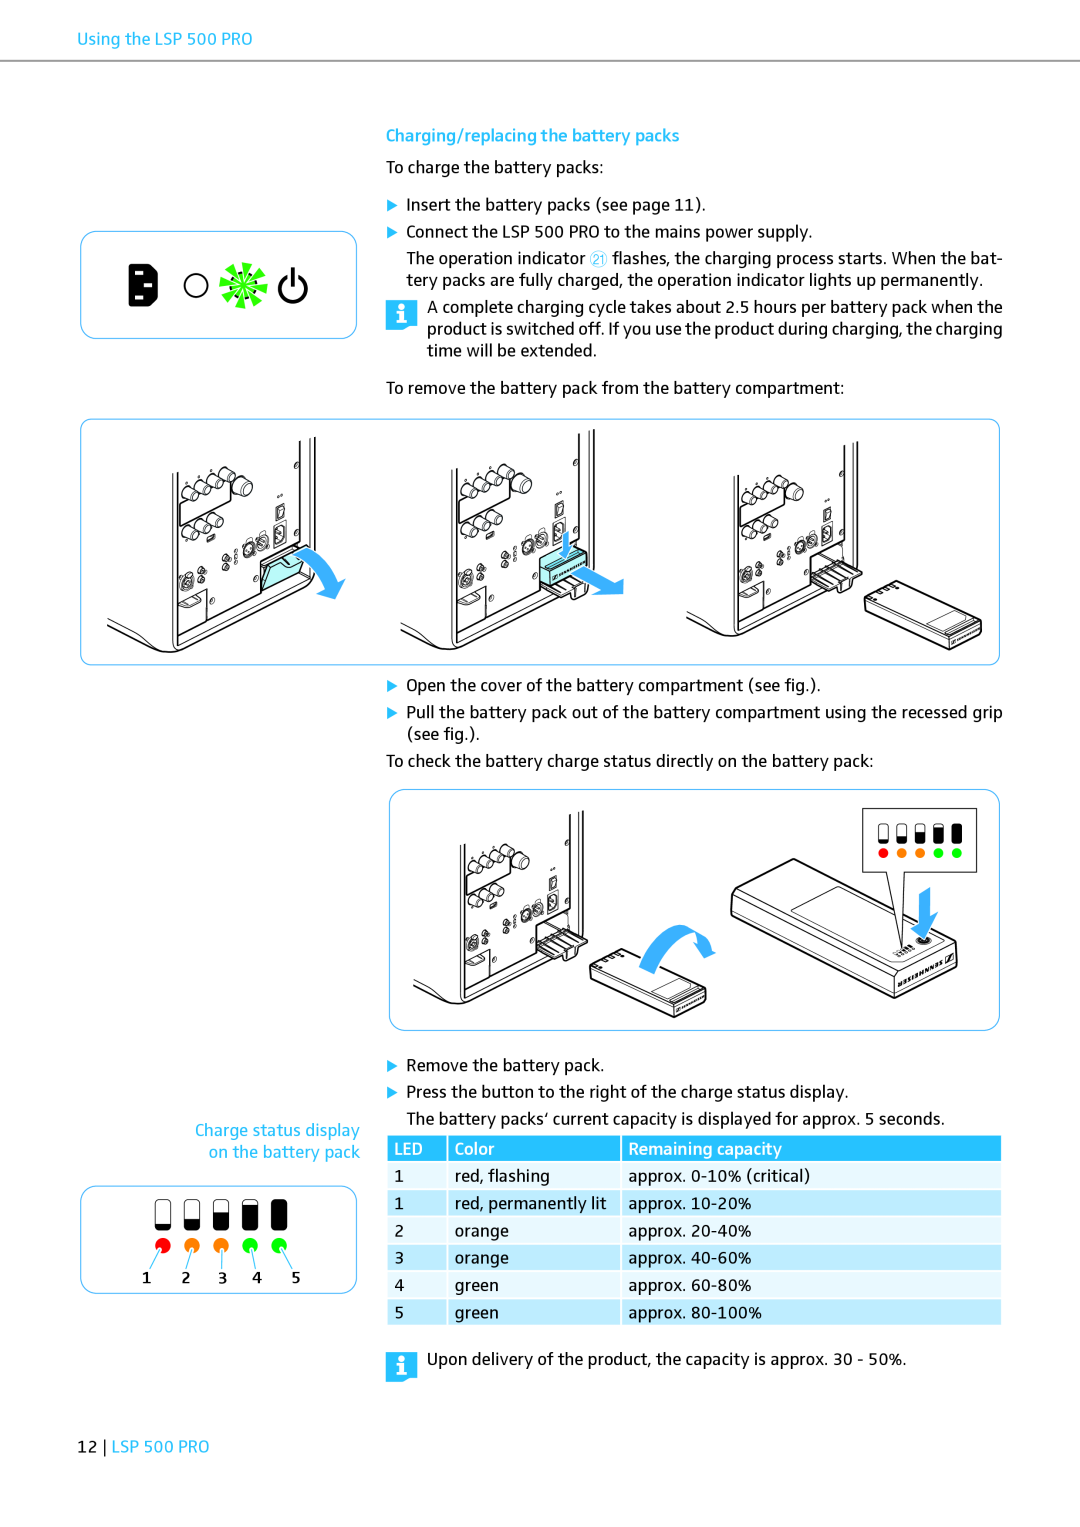 Sennheiser instruction manual Charging/replacing the battery packs, Color, Remaining capacity, Using the LSP 500 PRO 